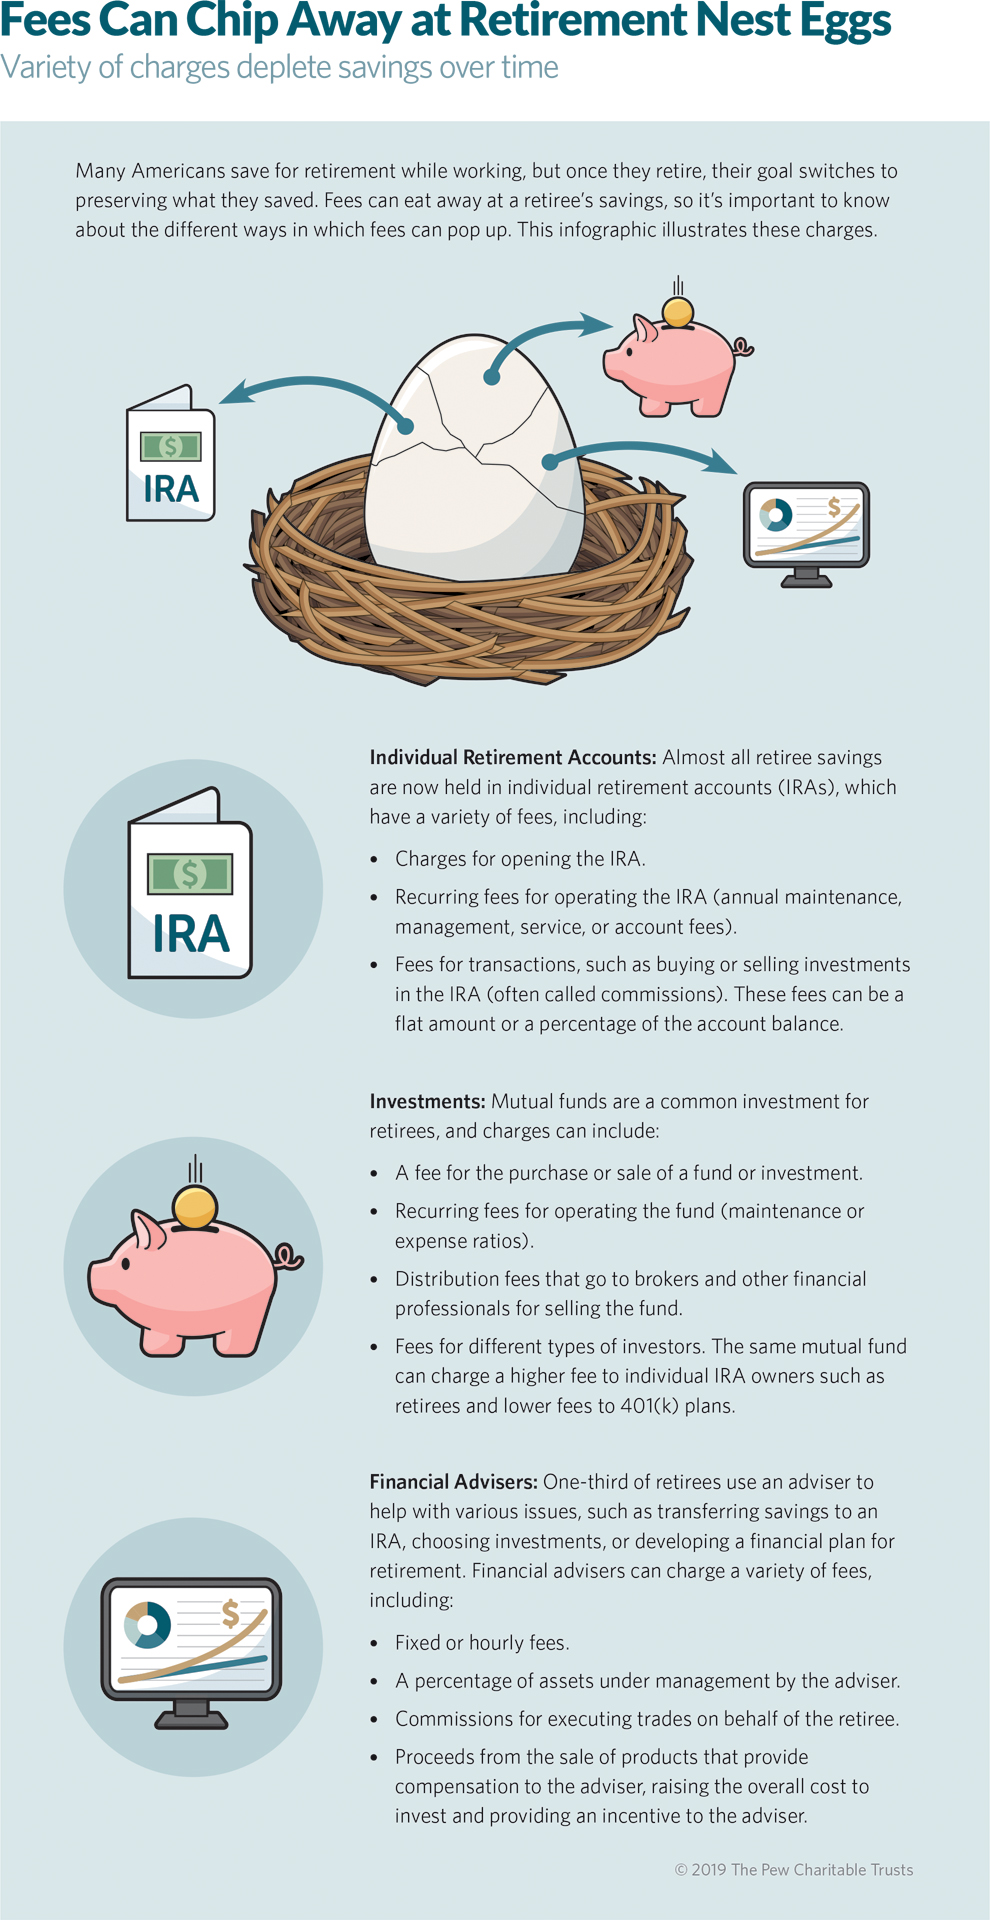 Many Americans save for retirement while working, but once they retire, their goal switches to preserving what they saved. Fees can eat away at a retiree’s savings, so it’s important to know about the different ways in which fees can pop up. This infographic illustrates these charges.